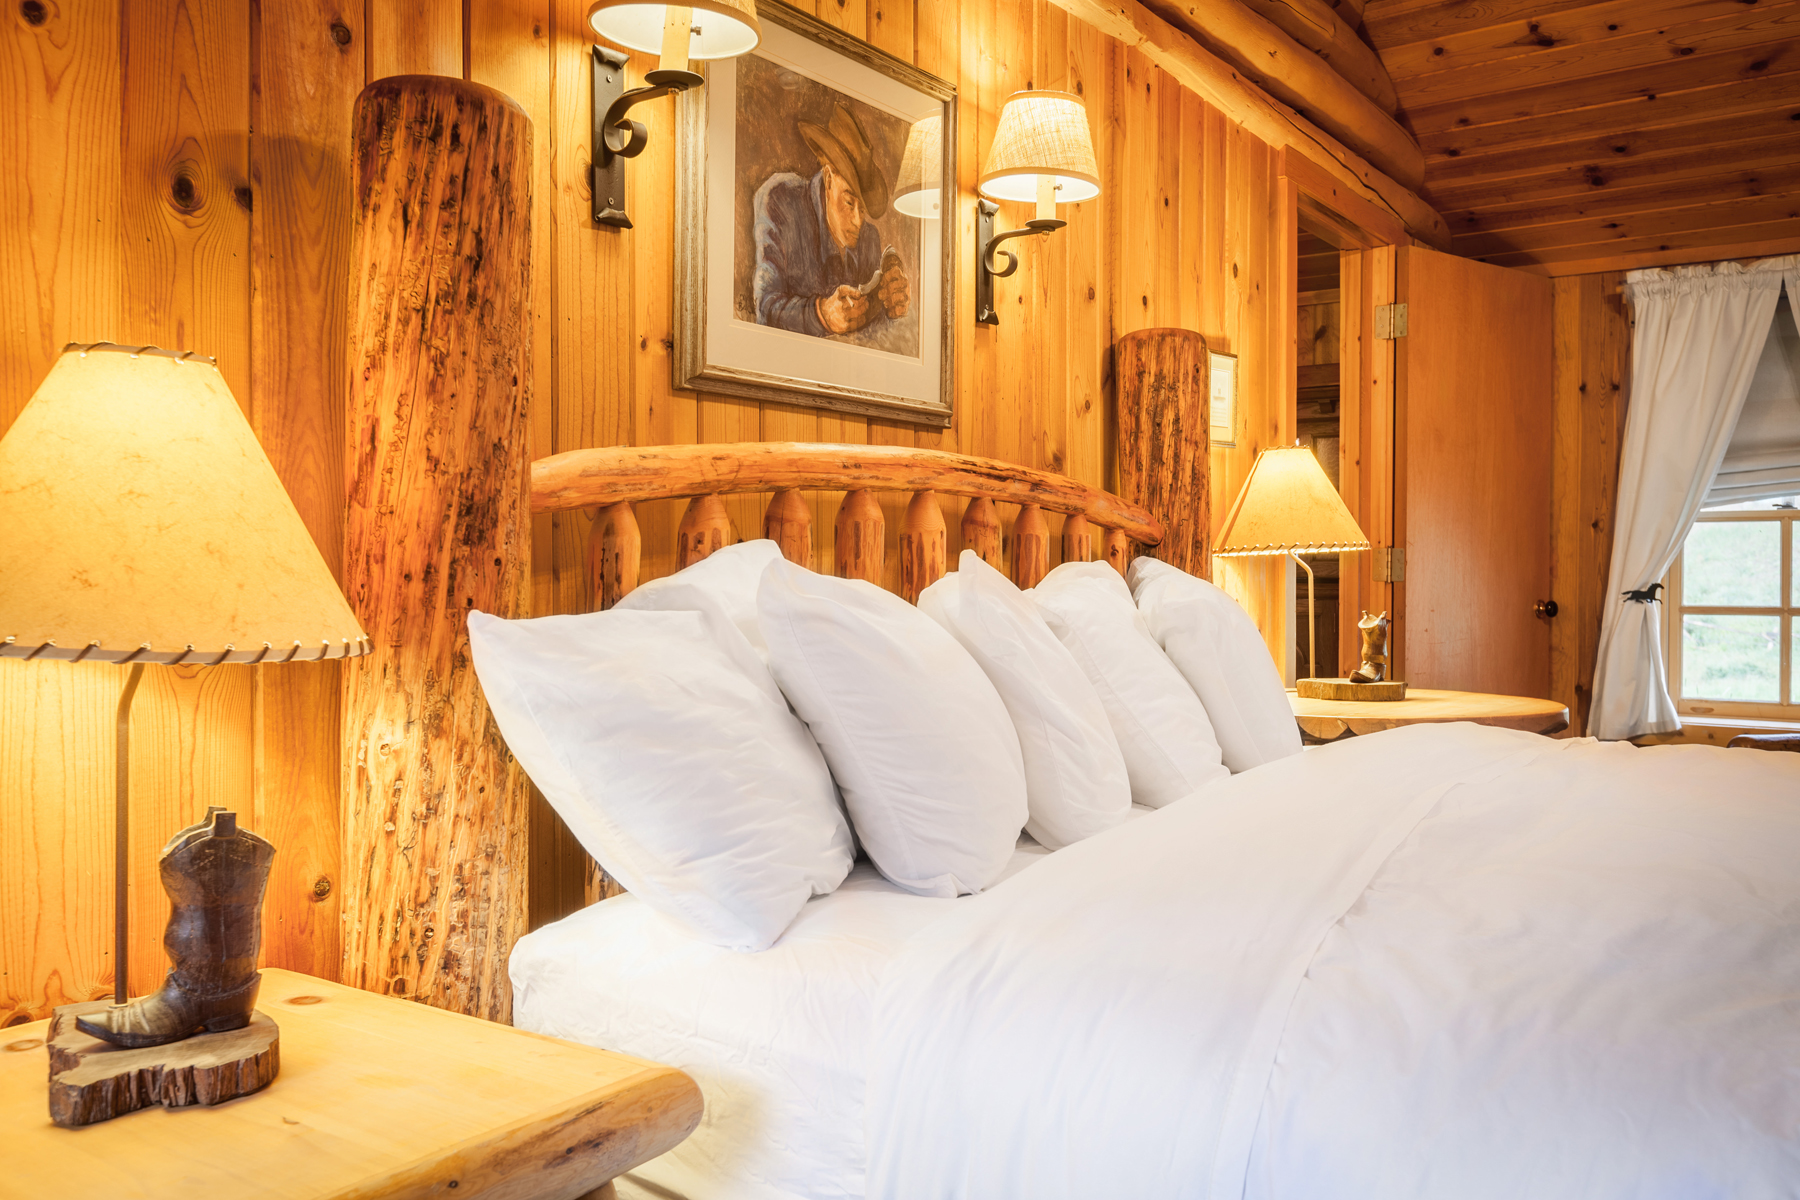 Guests can catch up on sleep this holiday in the cozy goose down bedding found in suites and cabins at Brooks Lake Lodge & Spa, quietly tucked deep in the woods for a peaceful night’s rest.